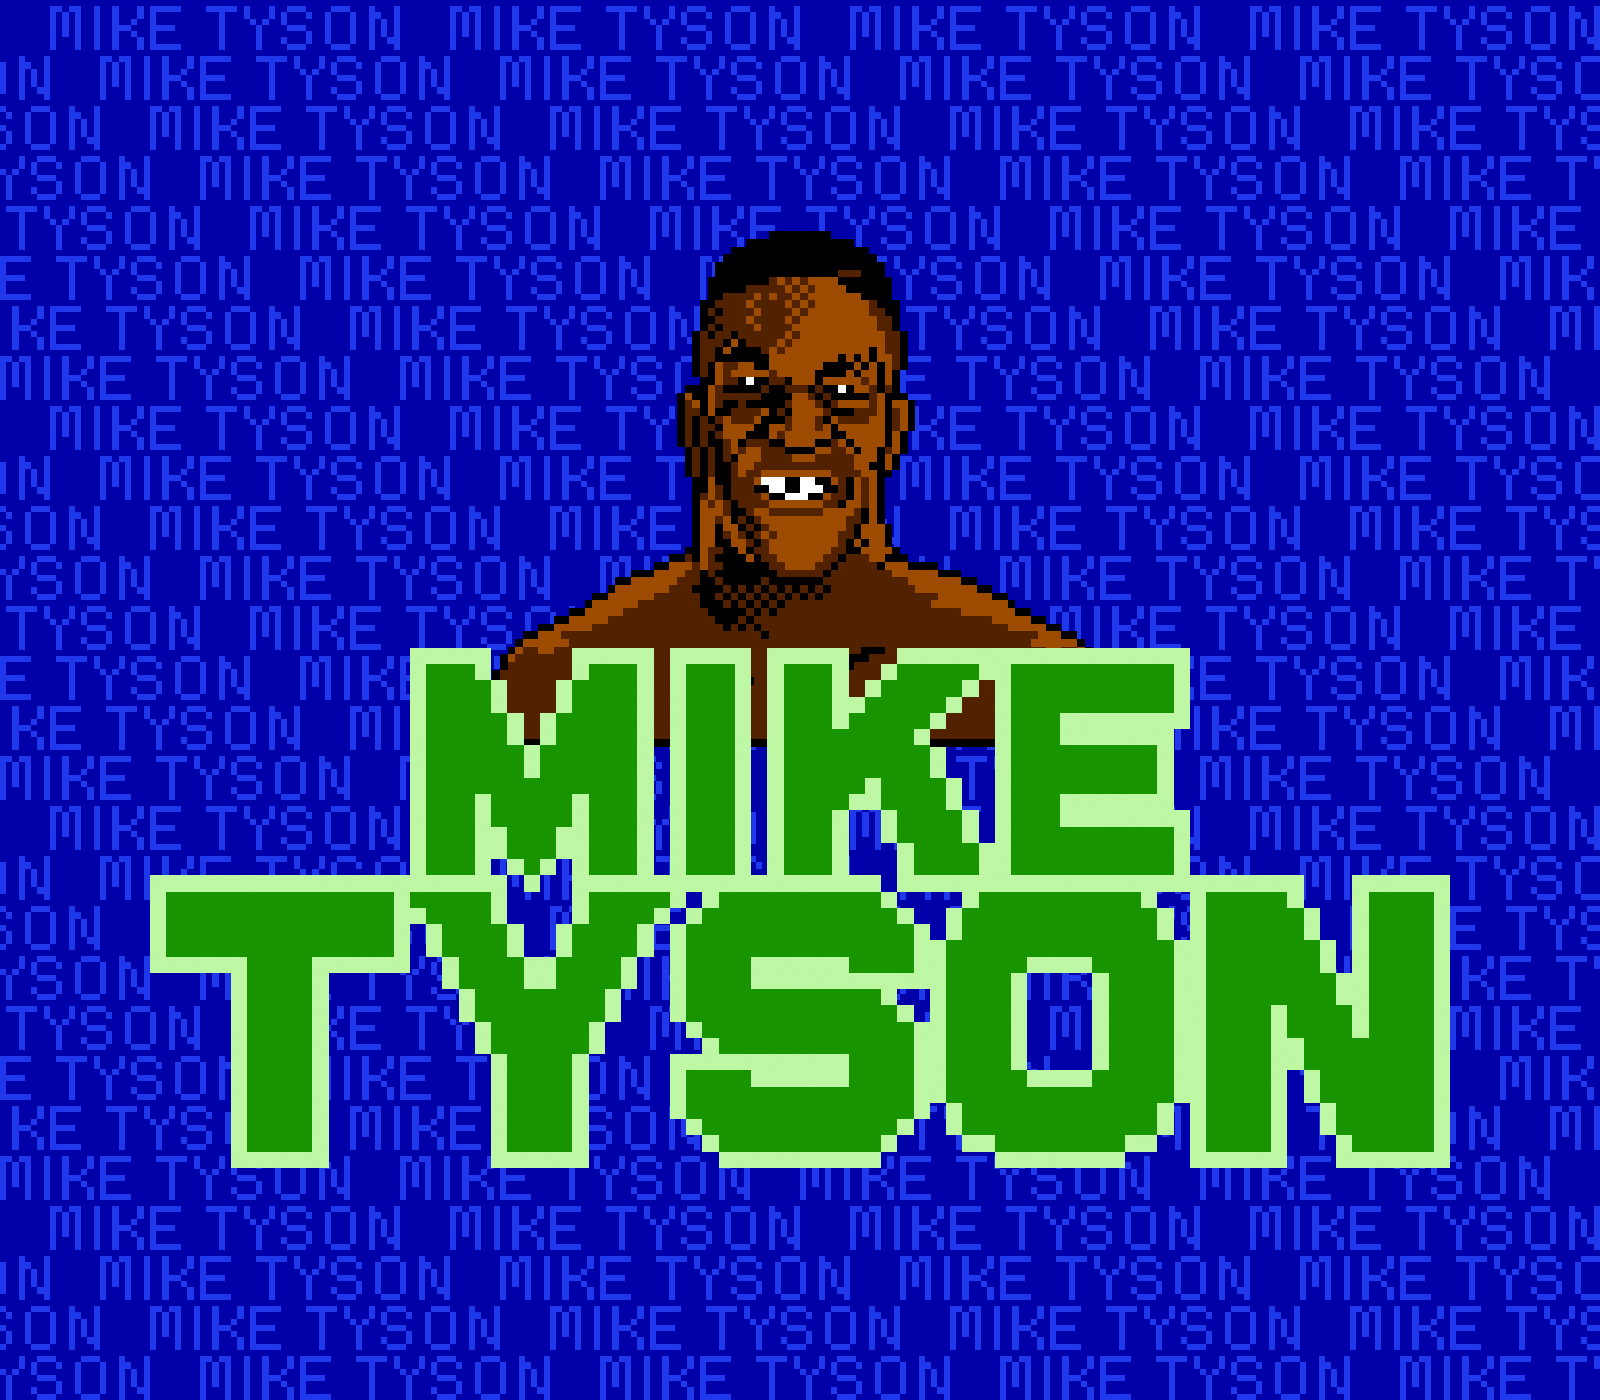 Miketyson - Mike Is Waiting For Your Challenge , HD Wallpaper & Backgrounds